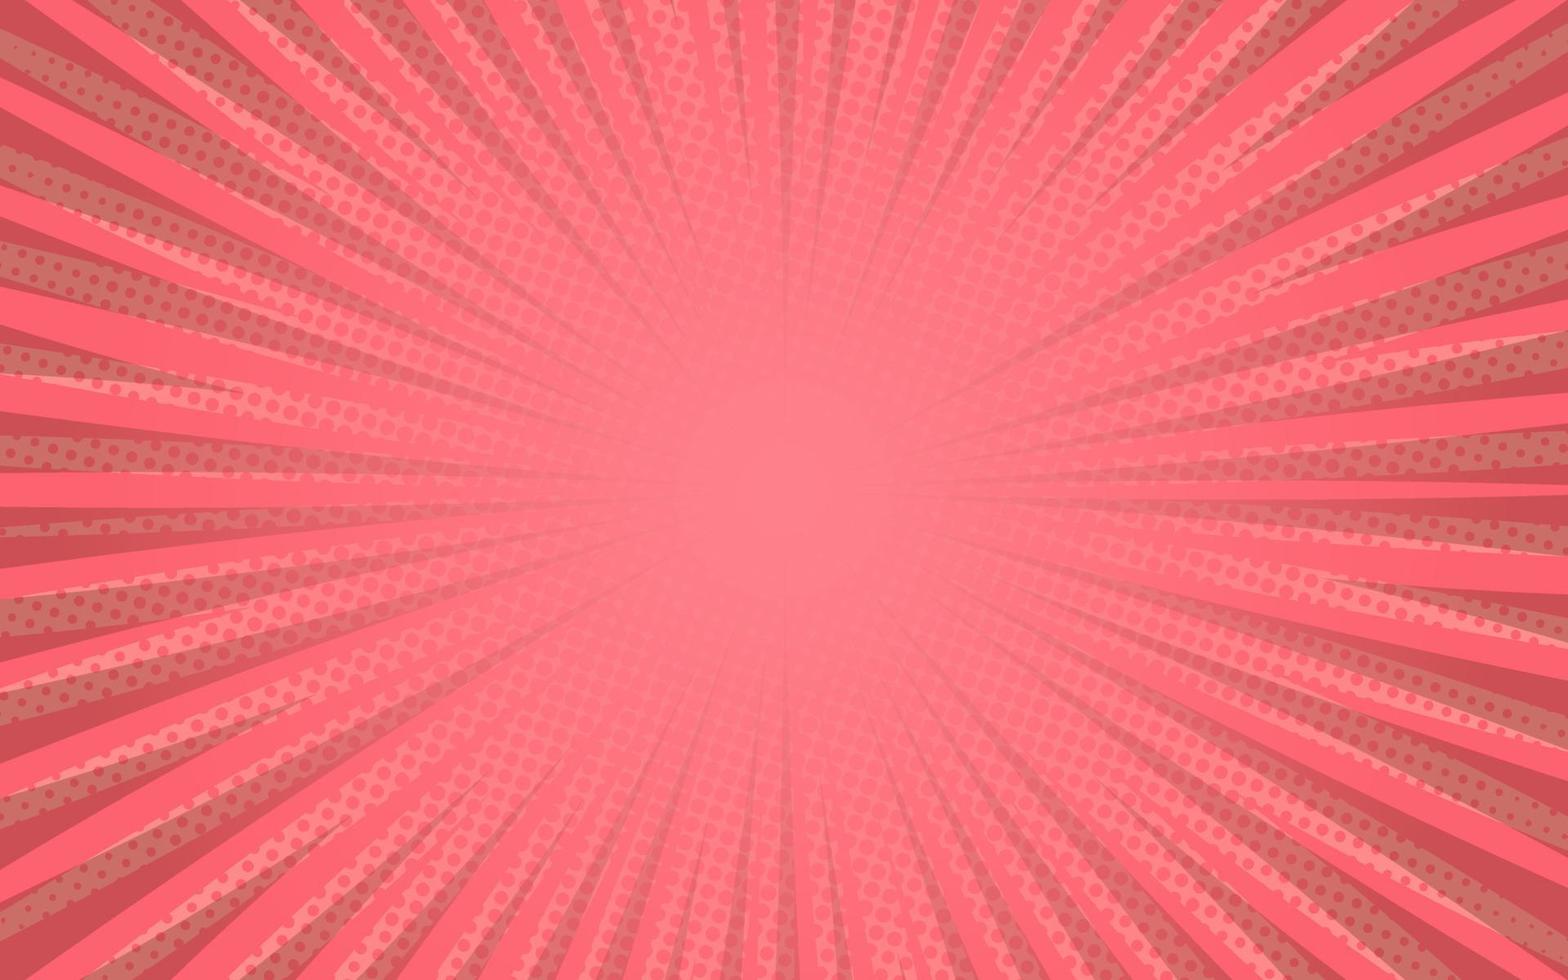 Sun rays Retro vintage style on pink background, Comic pattern with starburst and halftone. Cartoon retro sunburst effect with dots. Rays. Summer Banner Vector illustration